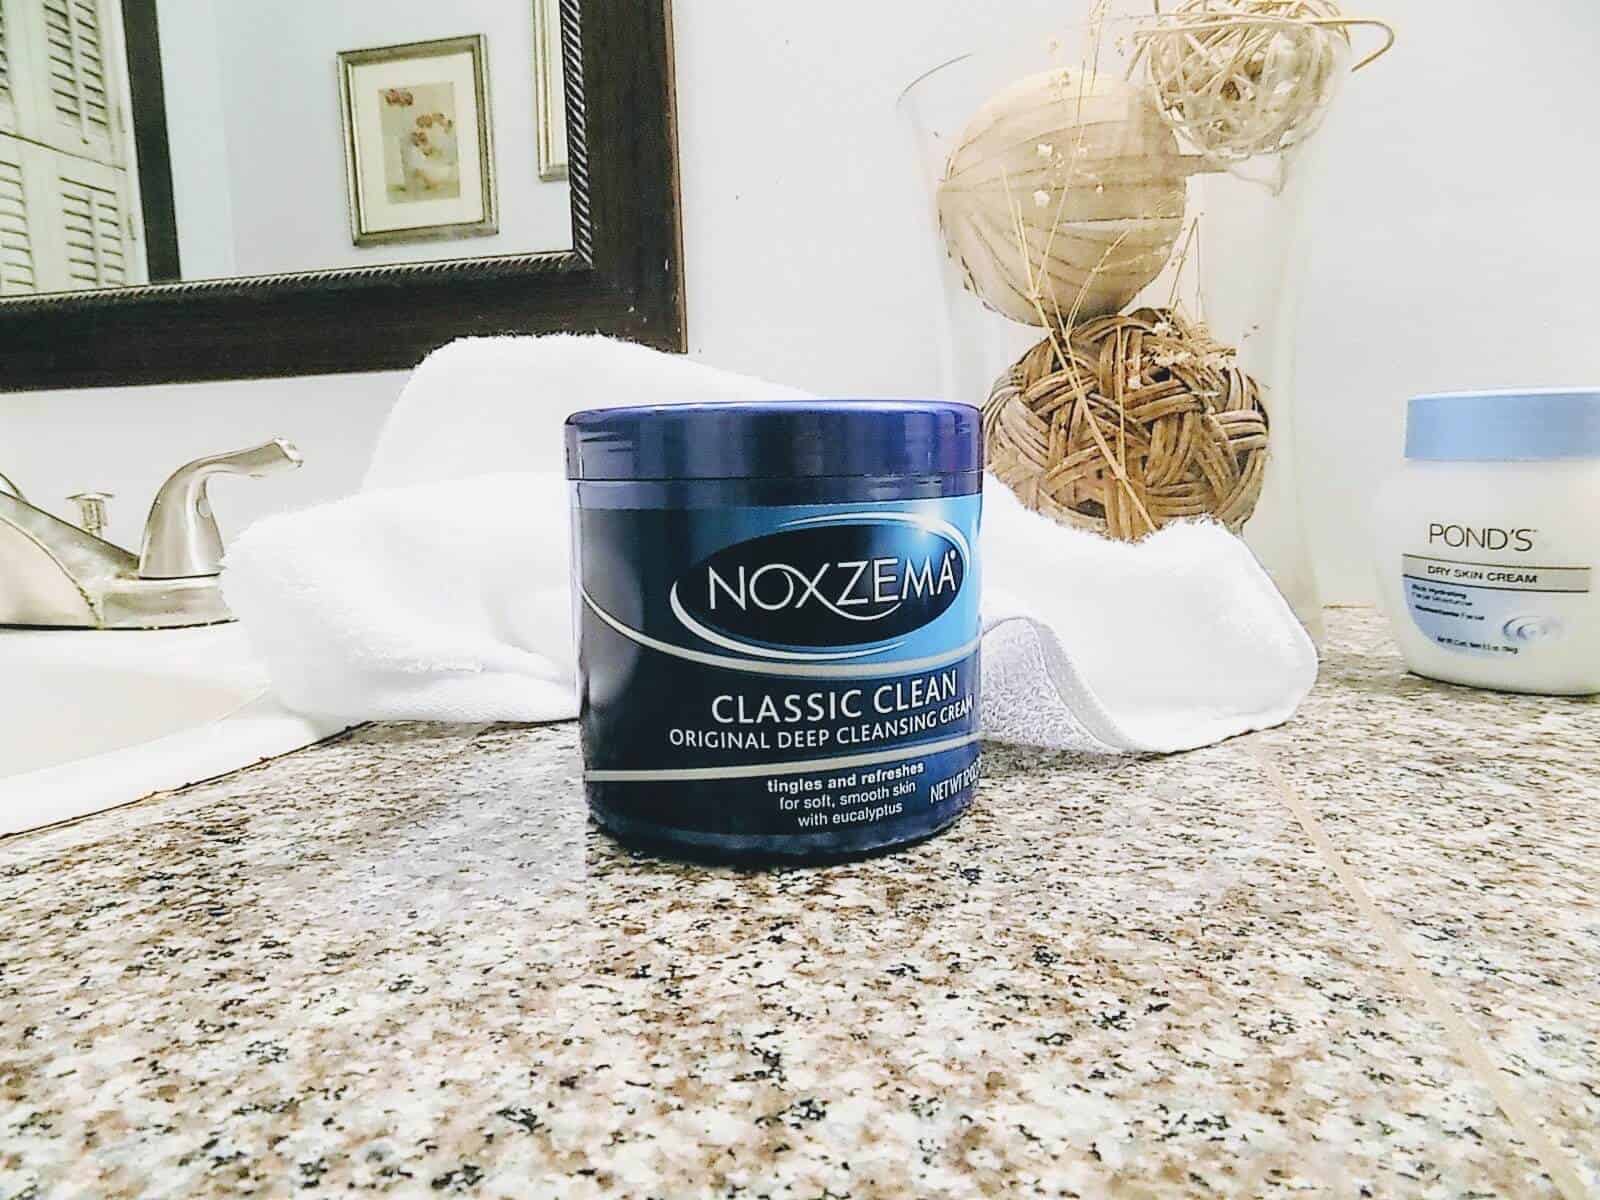 Noxema facial cleansing product.